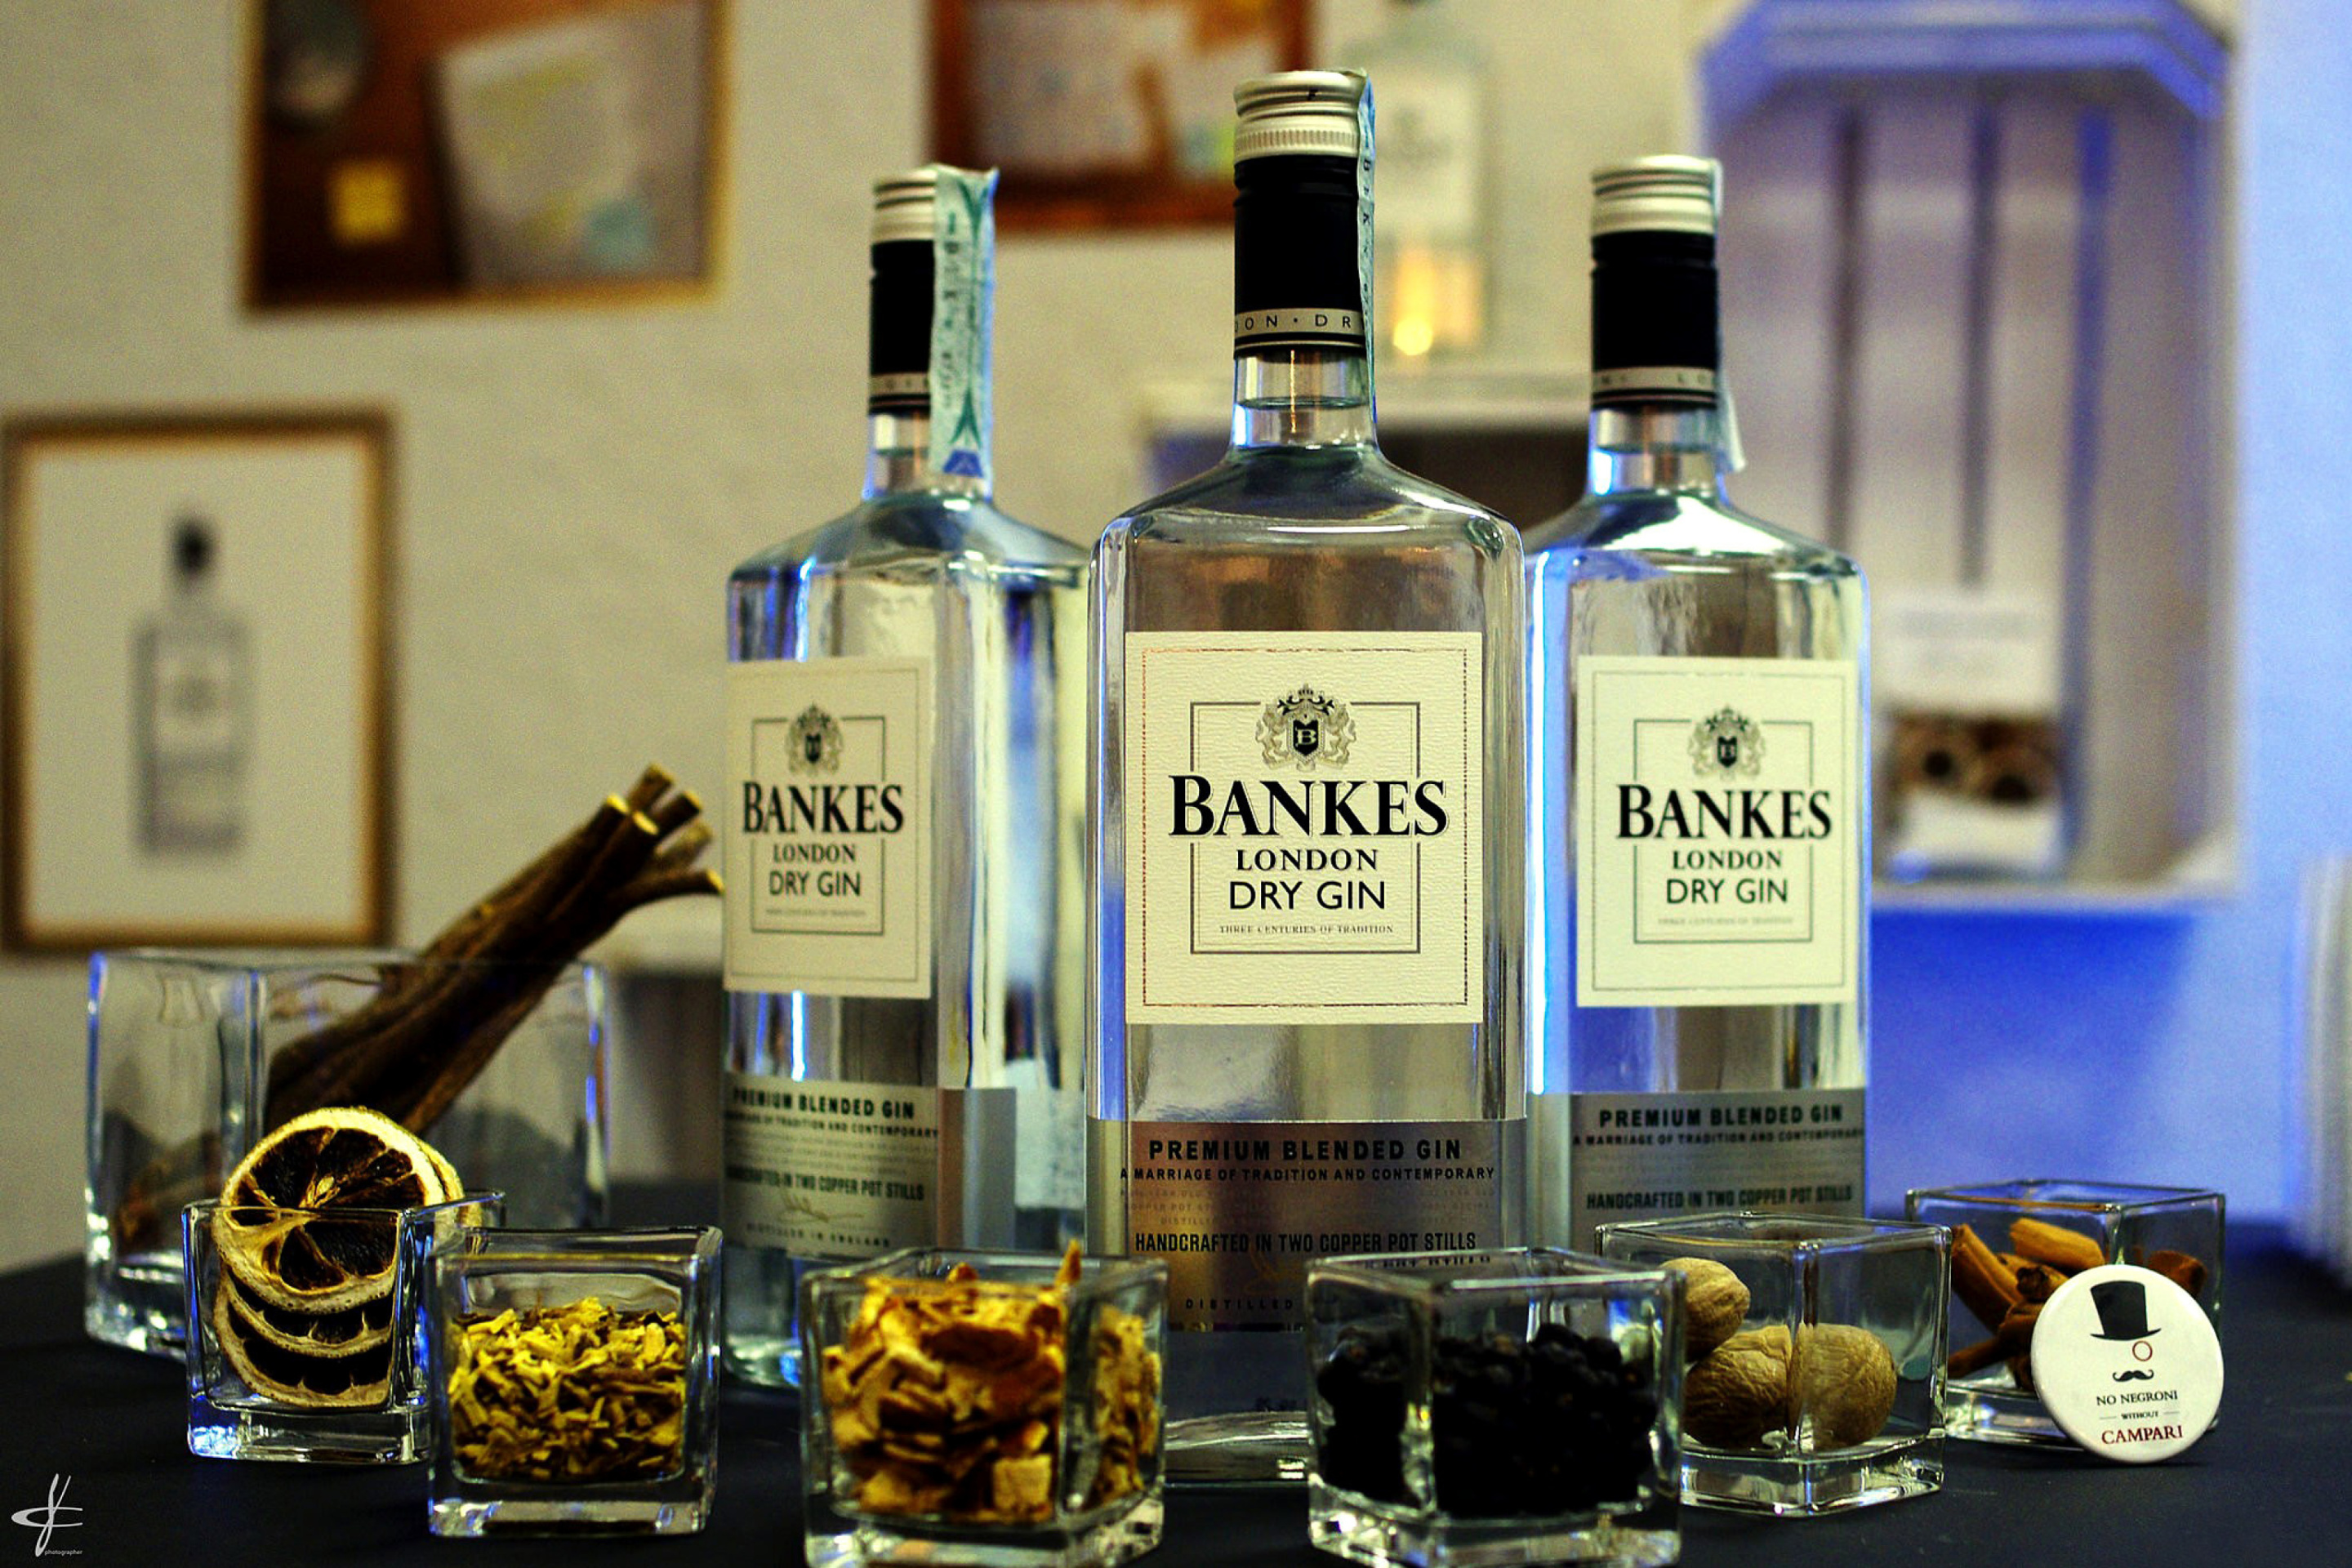 Dry Gin Bankers wallpaper 2880x1920